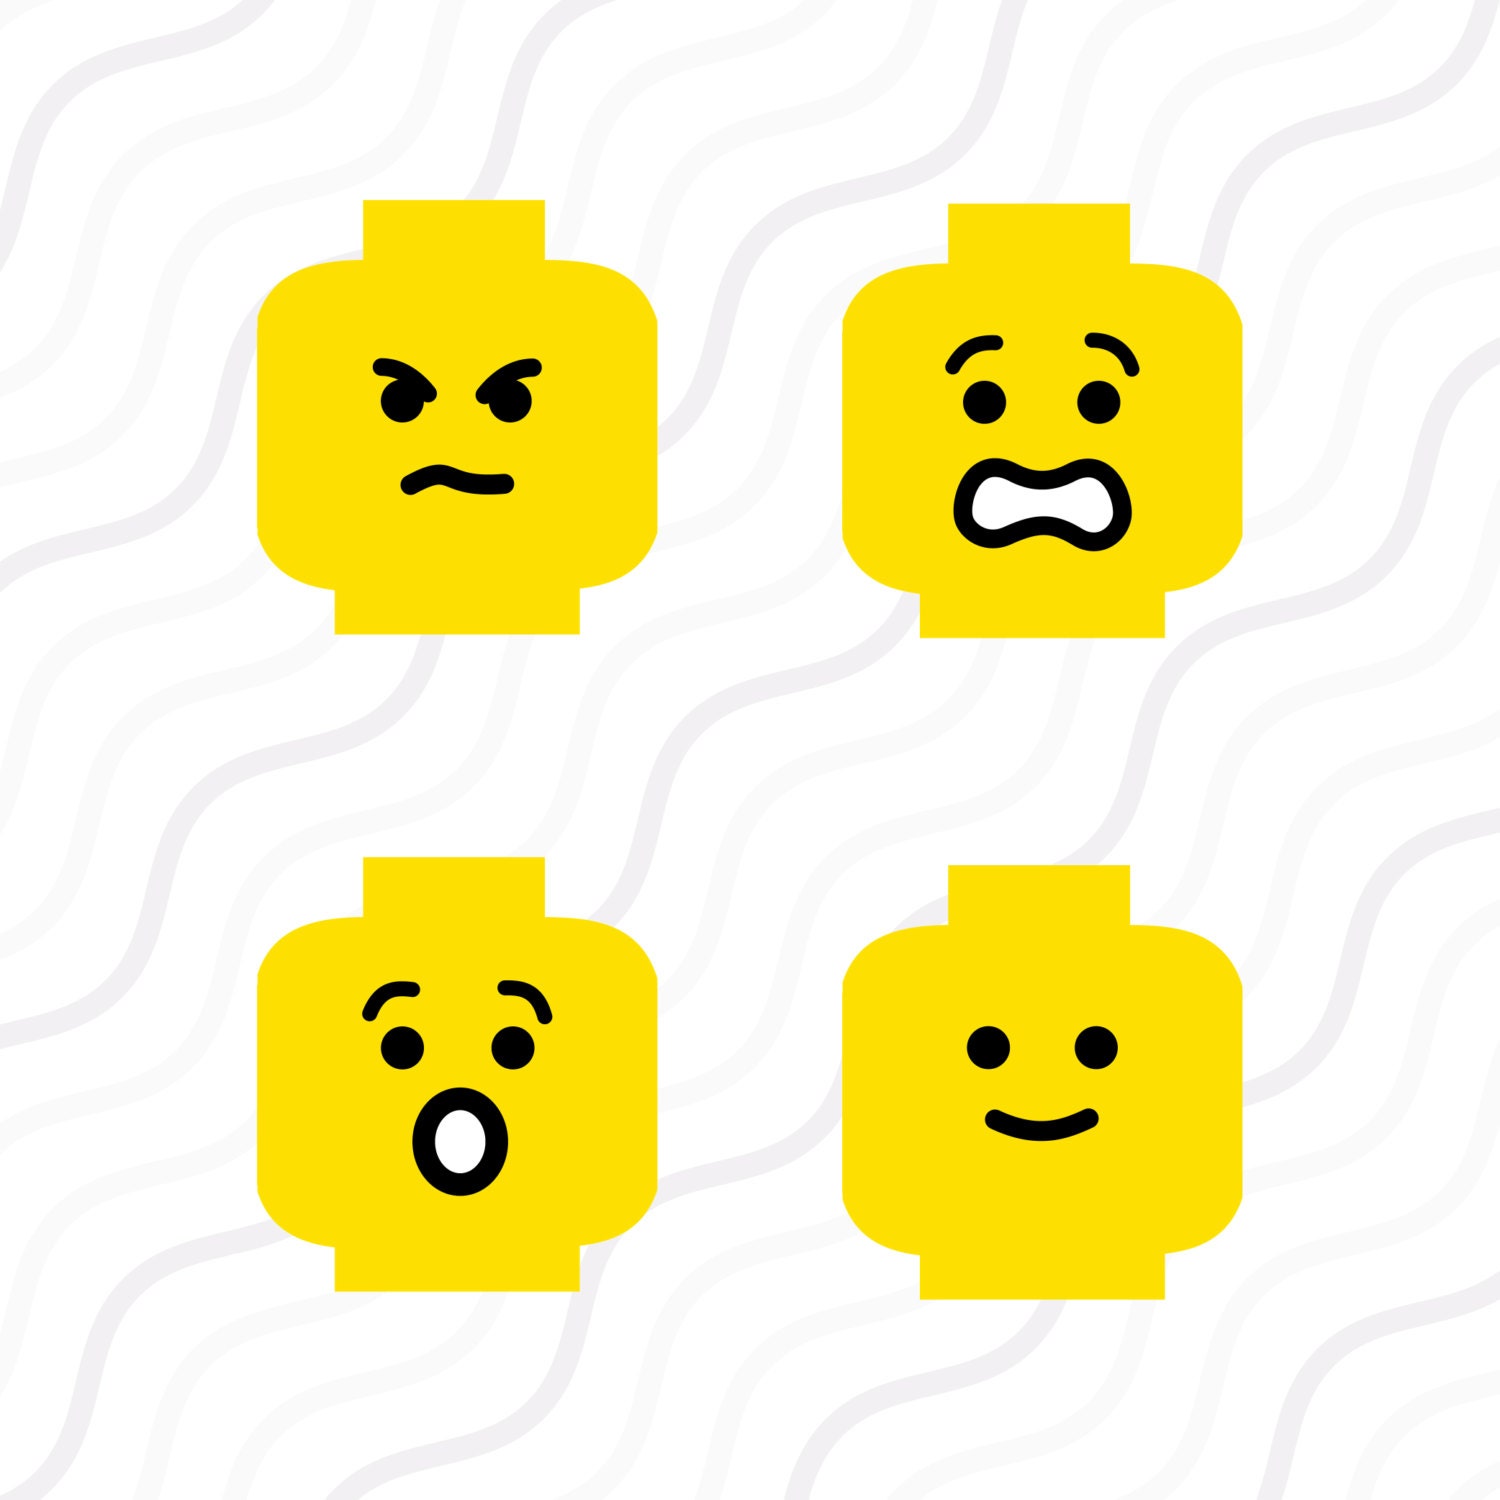 Download Lego Face SVG Lego SVG Lego Head SVG Cut by svgsilhouettecuts